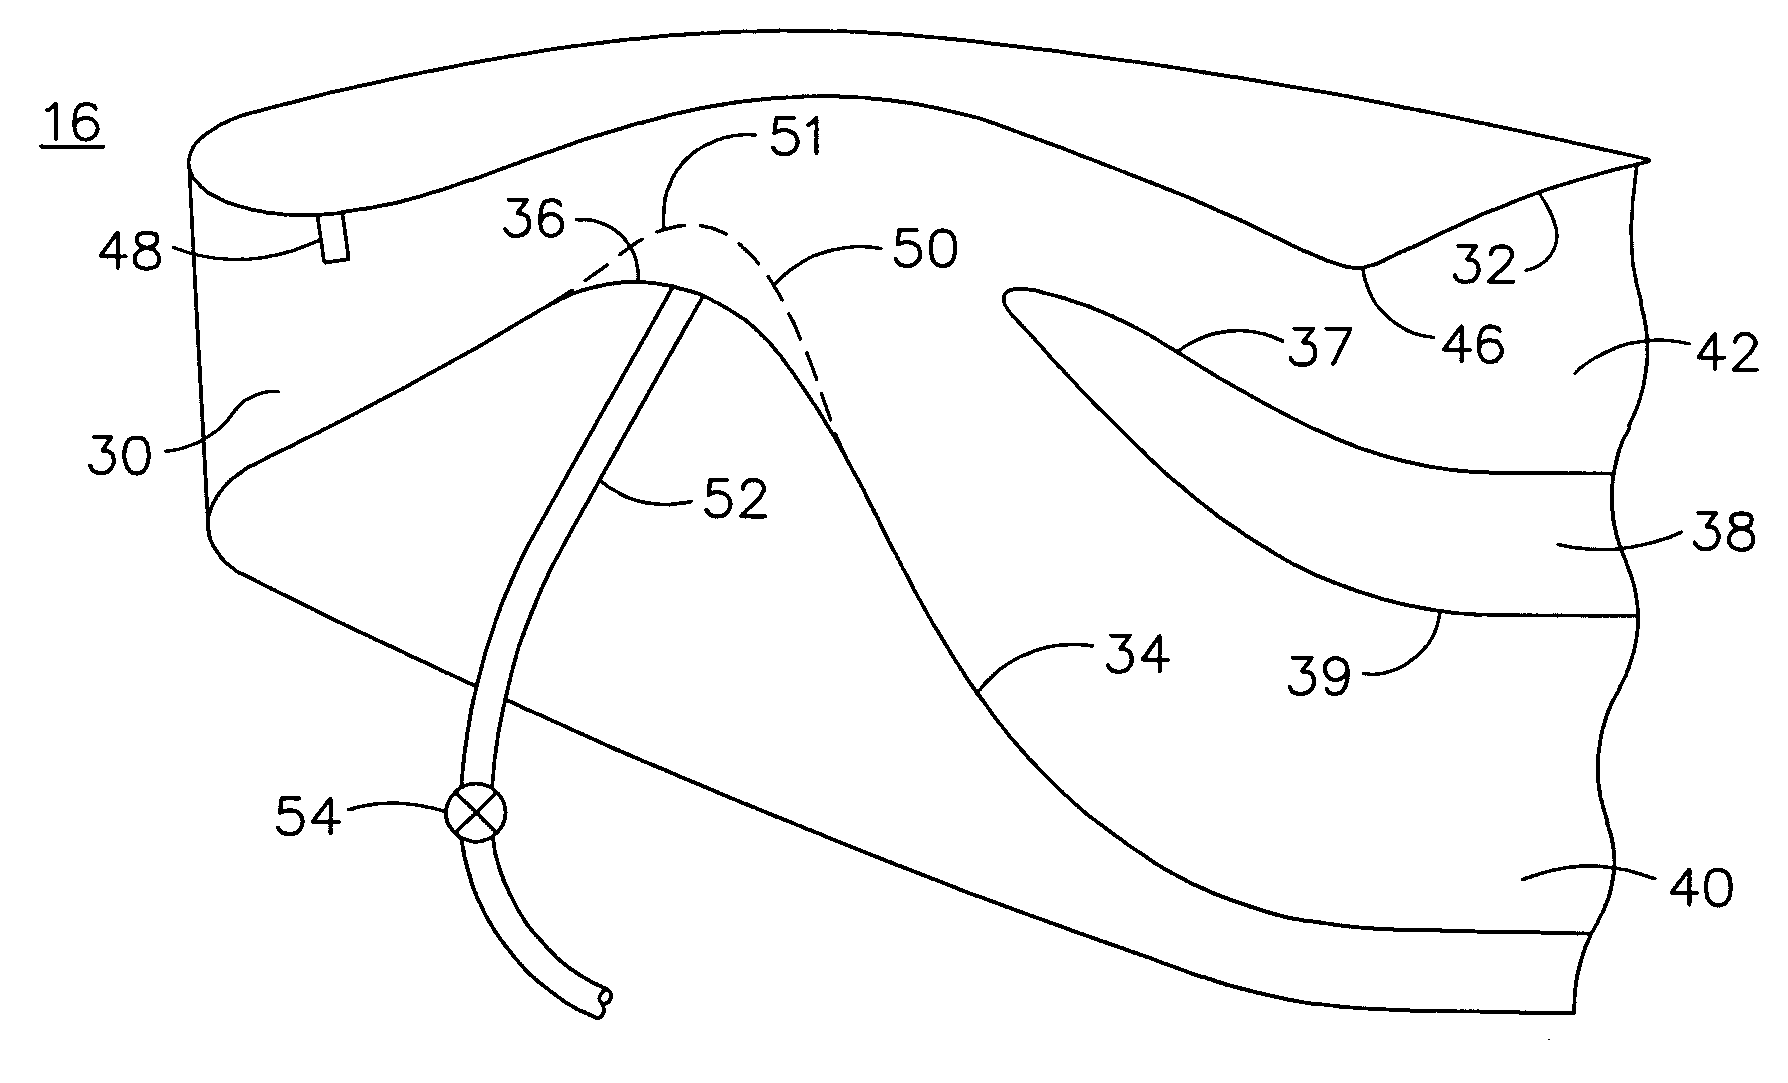 Adaptive inertial particle separators and methods of use